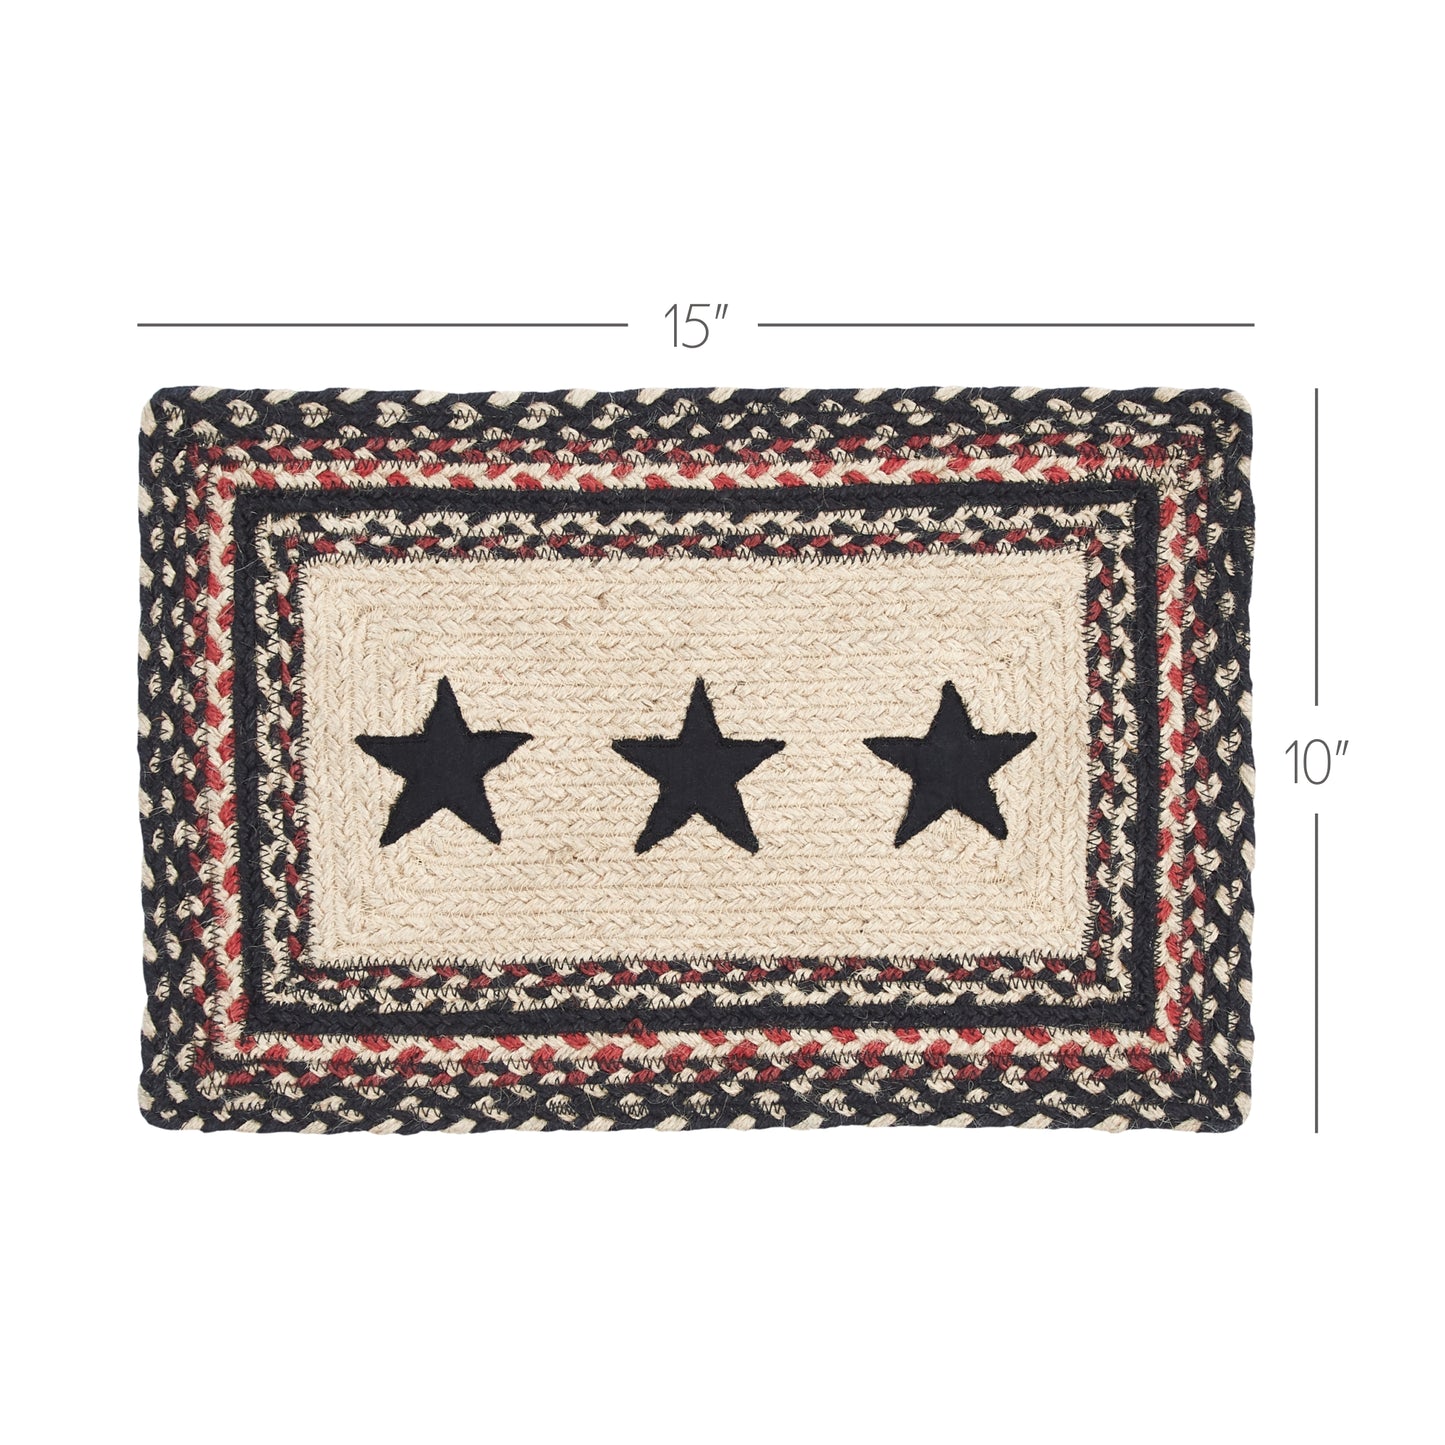 67136-Colonial-Star-Jute-Rect-Placemat-10x15-image-1